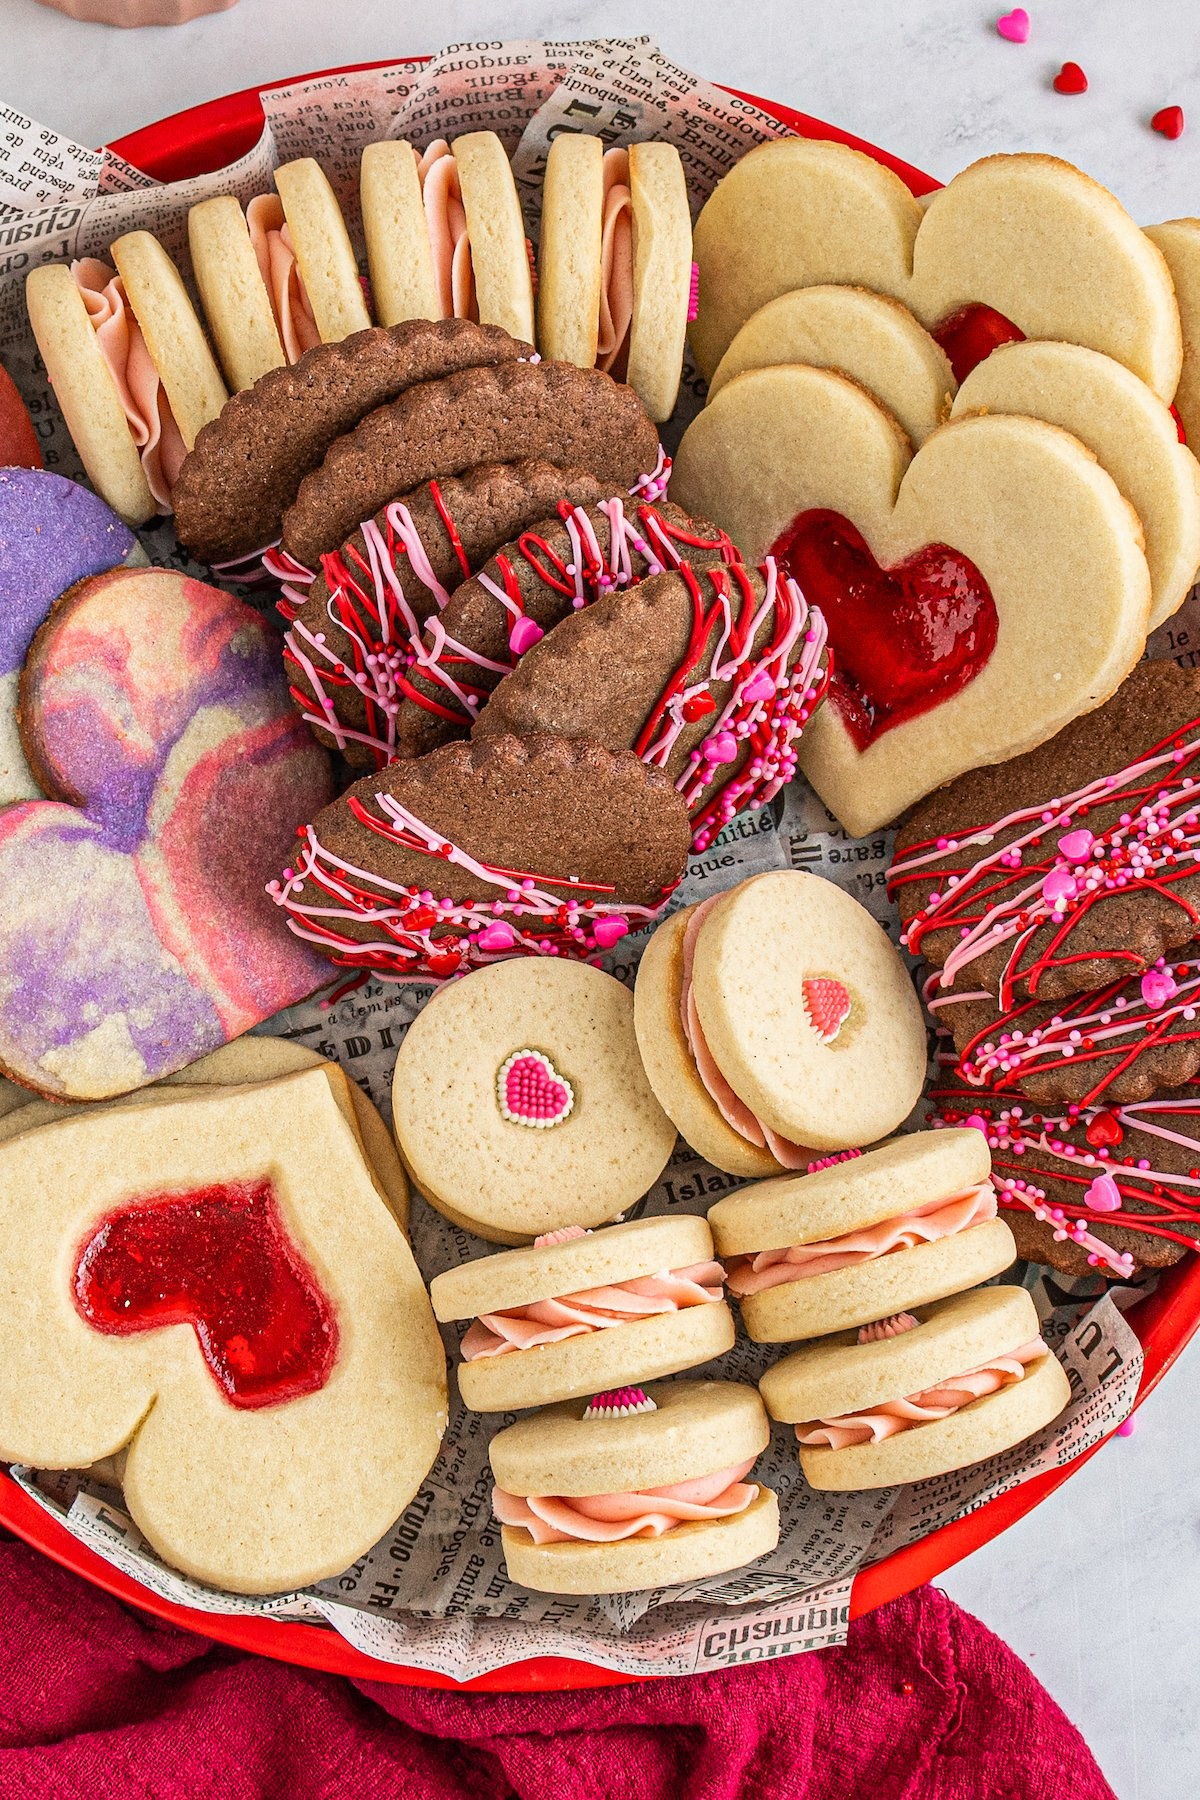 Heart-shaped cookies, sandwich cookies, marbled cookies, and chocolate iced cookies arranged on a red plate.